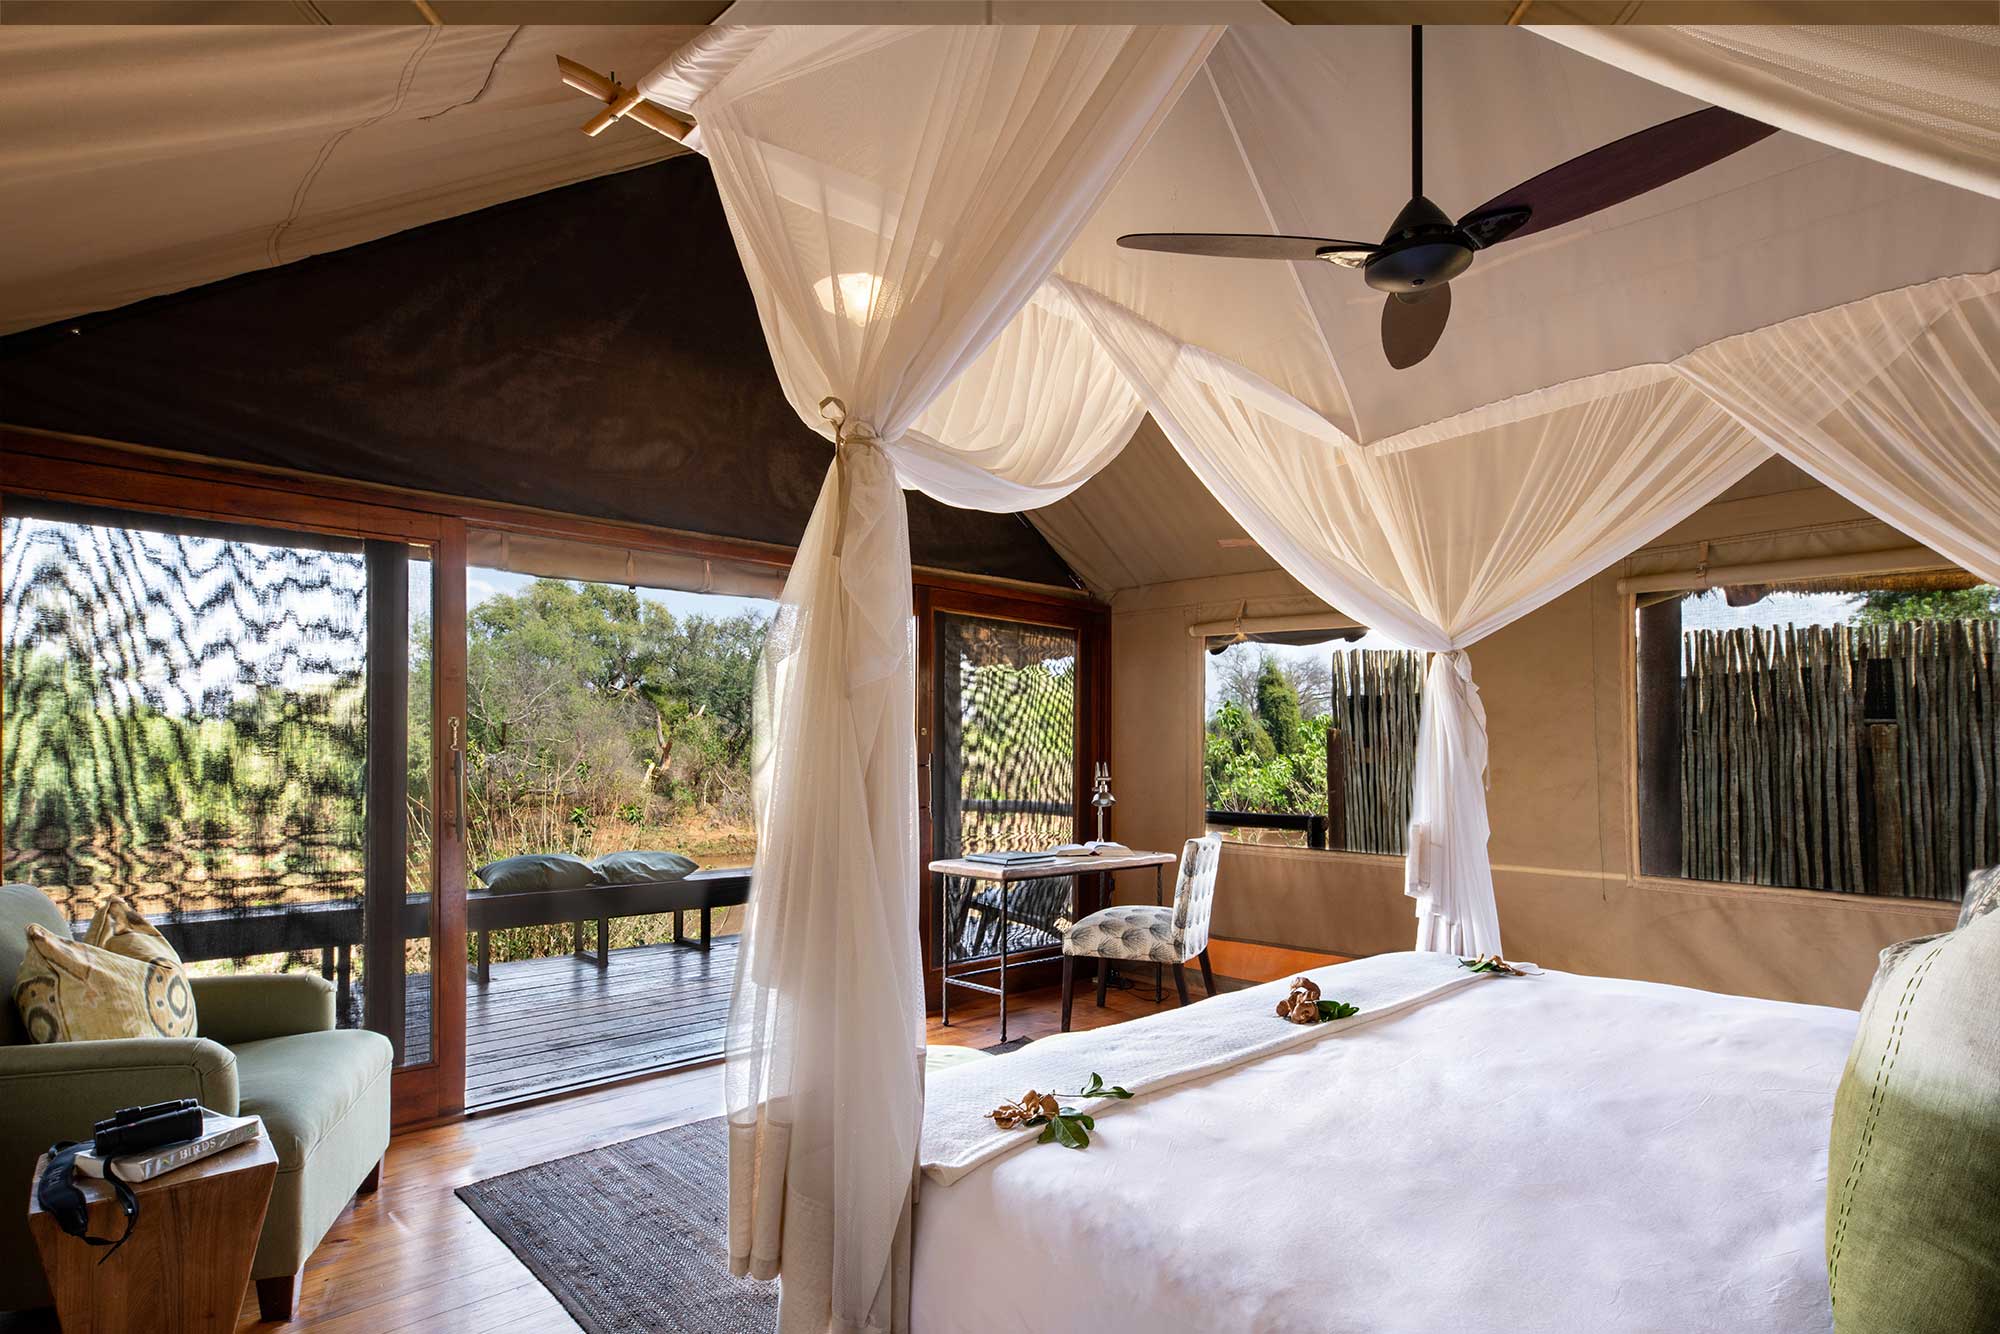 A luxury tent interior with a canopy bed, white linens, a ceiling fan, a writing desk, a green sofa, and an open view of a wooden deck and lush greenery through large glass doors at return Africa a lodge for a safari elopement